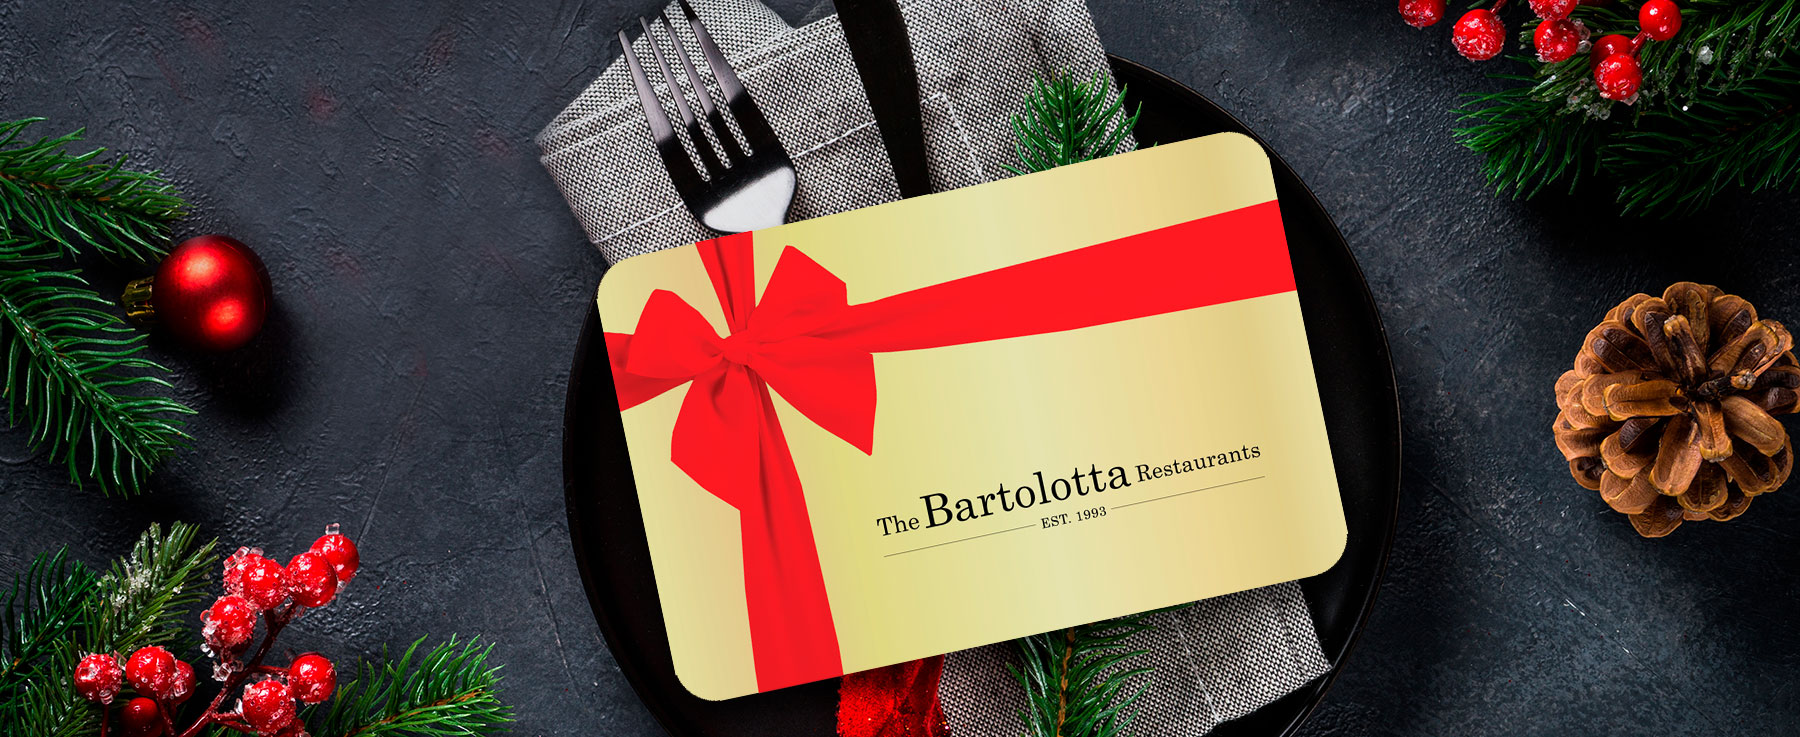 GIVE THE GIFT OF A BARTOLOTTA EXPERIENCE FOR THE HOLIDAY